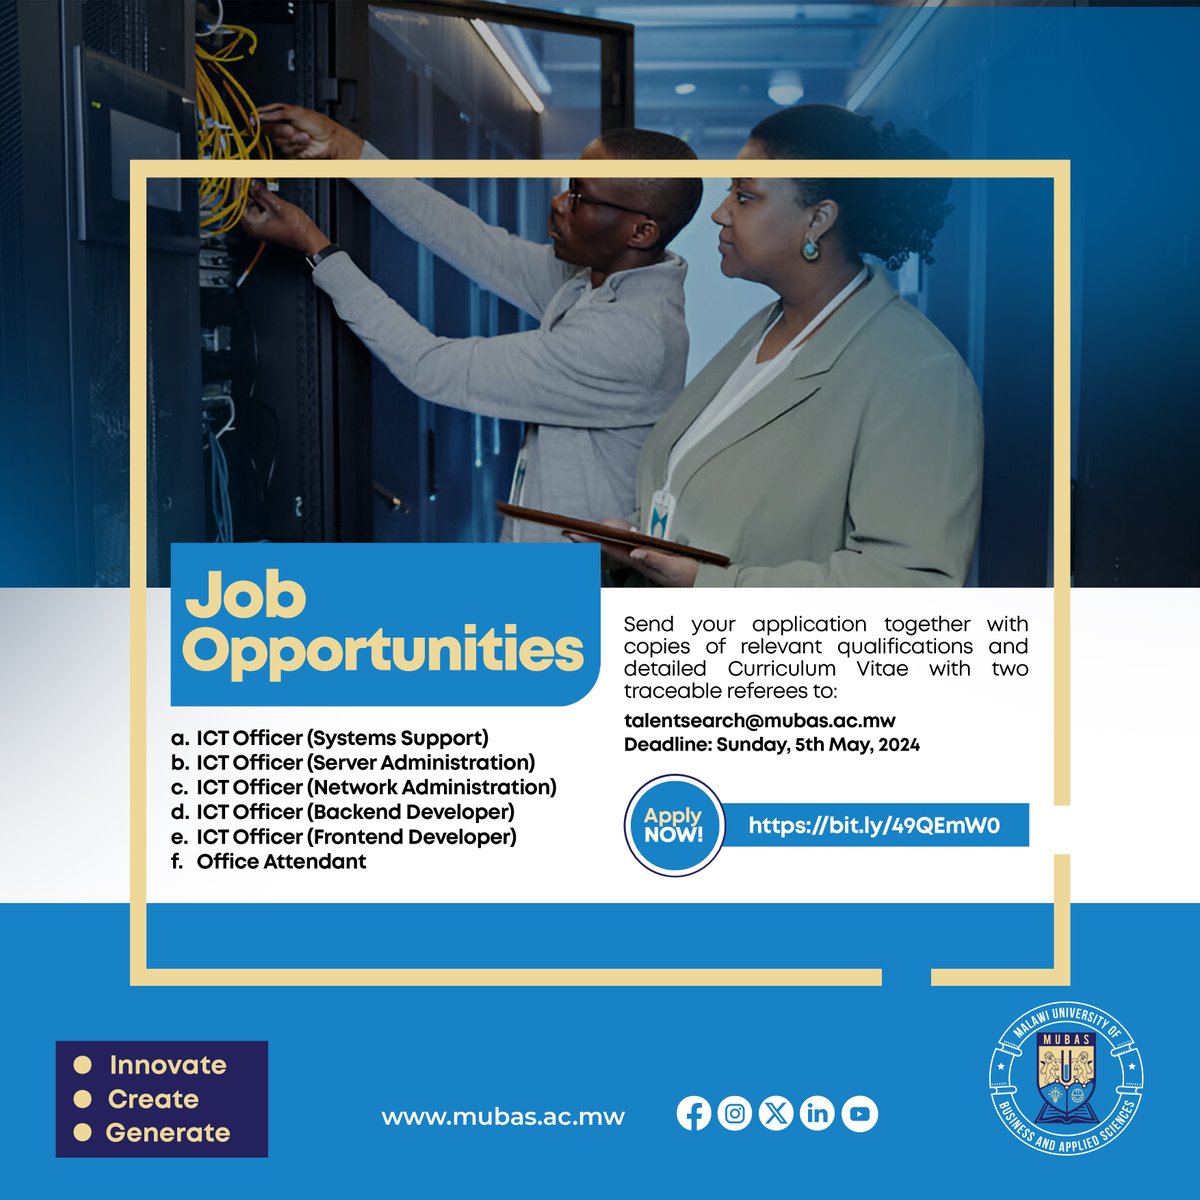 𝗪𝗲 𝗮𝗿𝗲 𝗵𝗶𝗿𝗶𝗻𝗴! Applications are invited from suitably qualified candidates for the following positions tenable at MUBAS in Blantyre. Full advert: bit.ly/49QEmW0 #TheHomeOfInnovation #JoinMUBAS #Innovate #Create #Generate